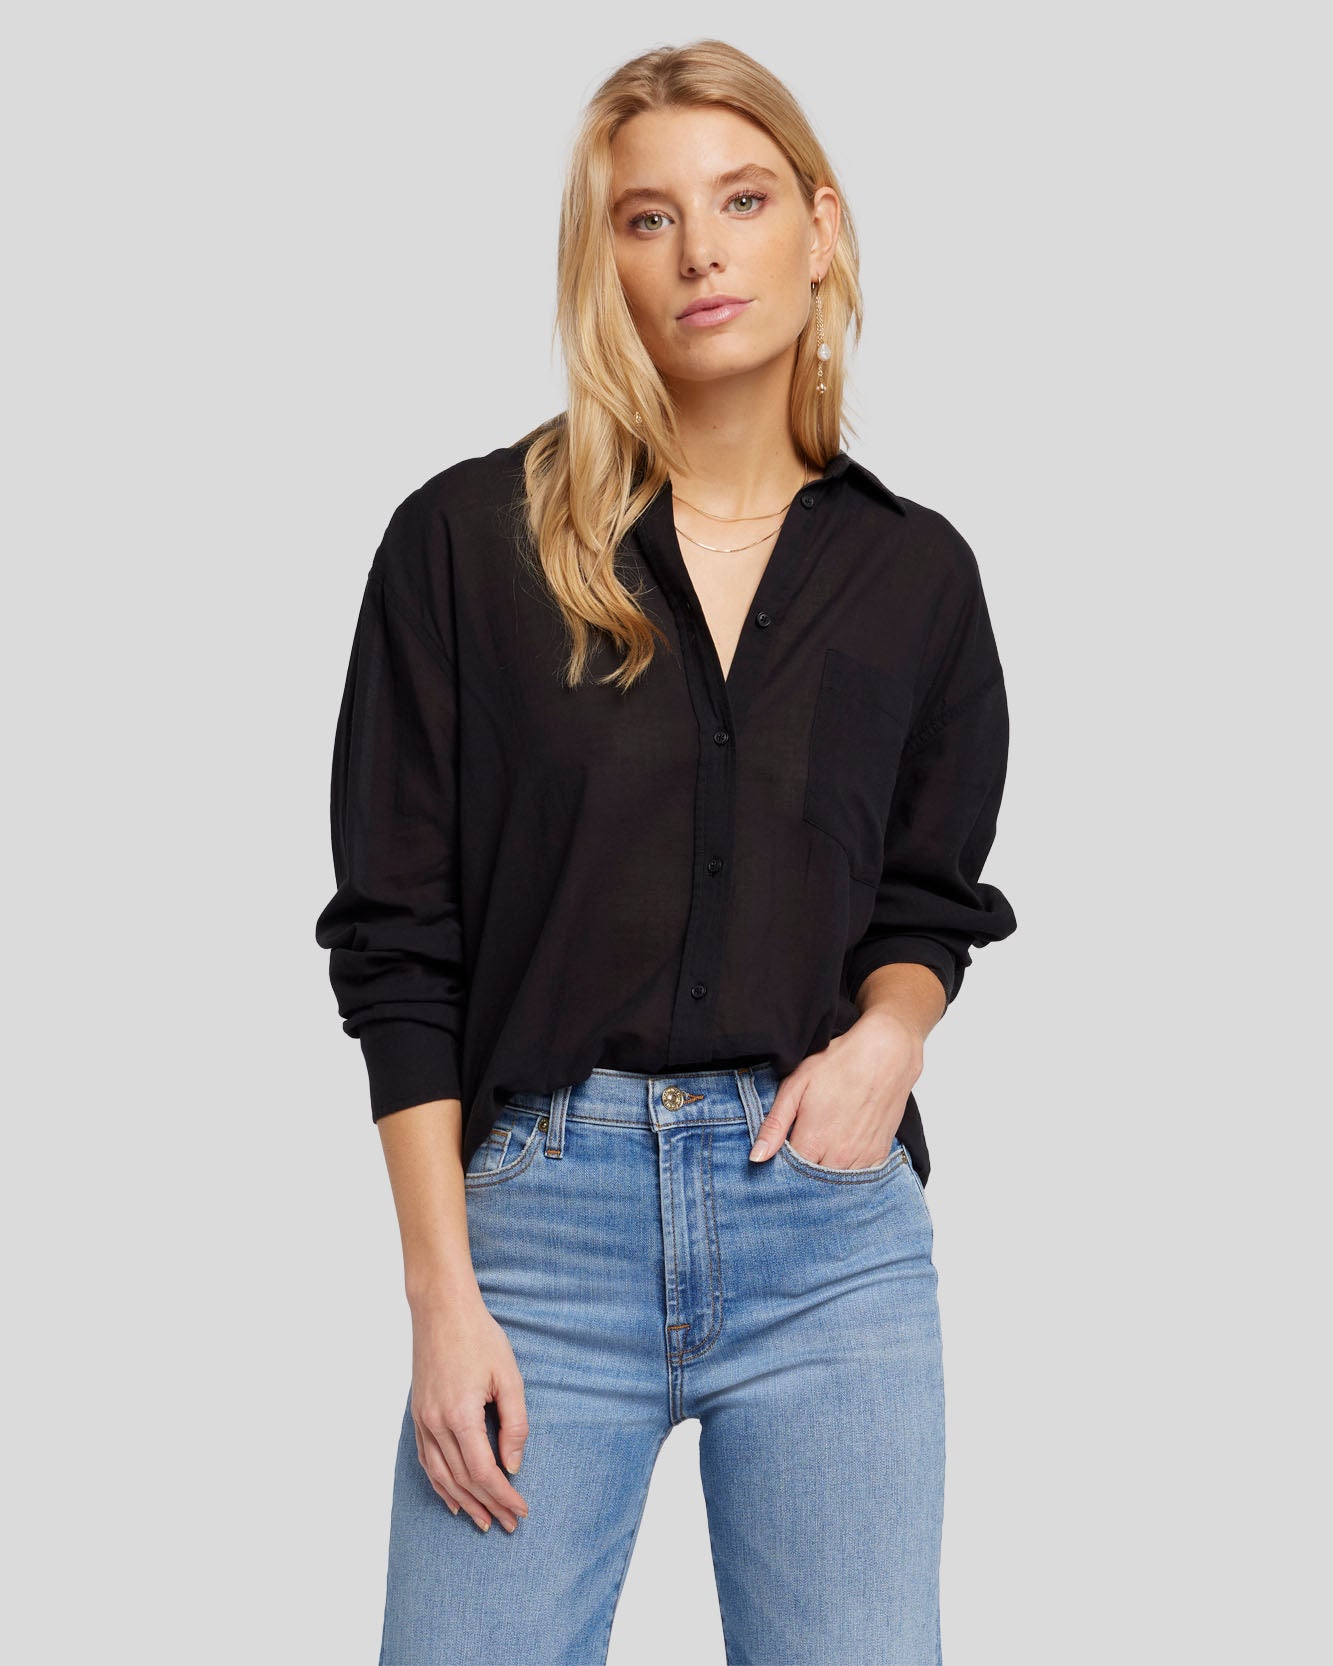 classic button up shirt in black